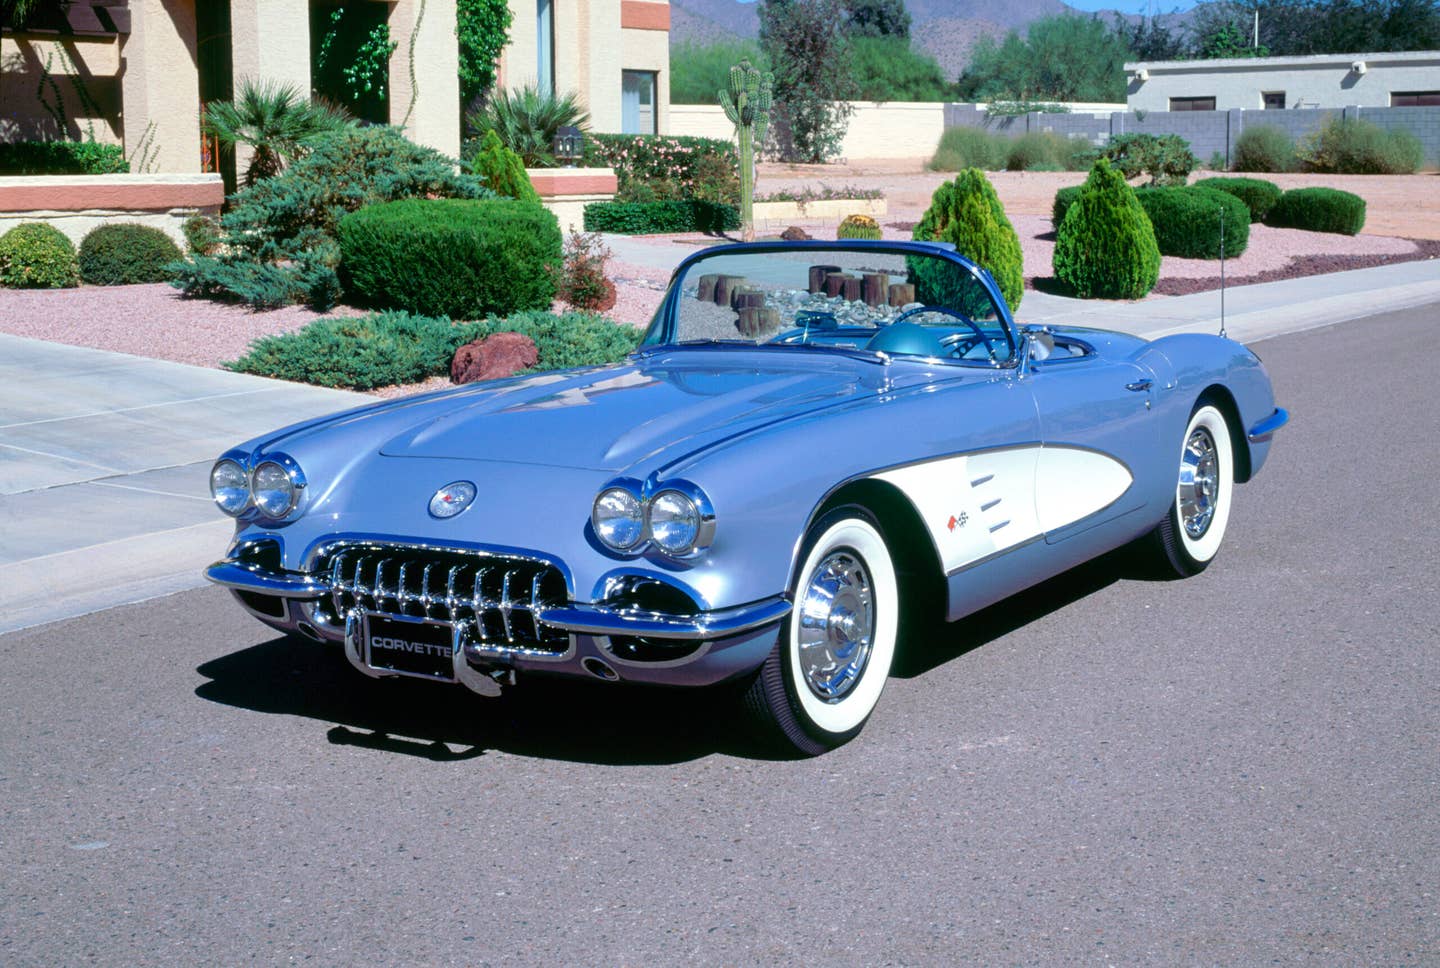 1959 Chevrolet Corvette, 2000. (Photo by National Motor Museum/Heritage Images/Getty Images)